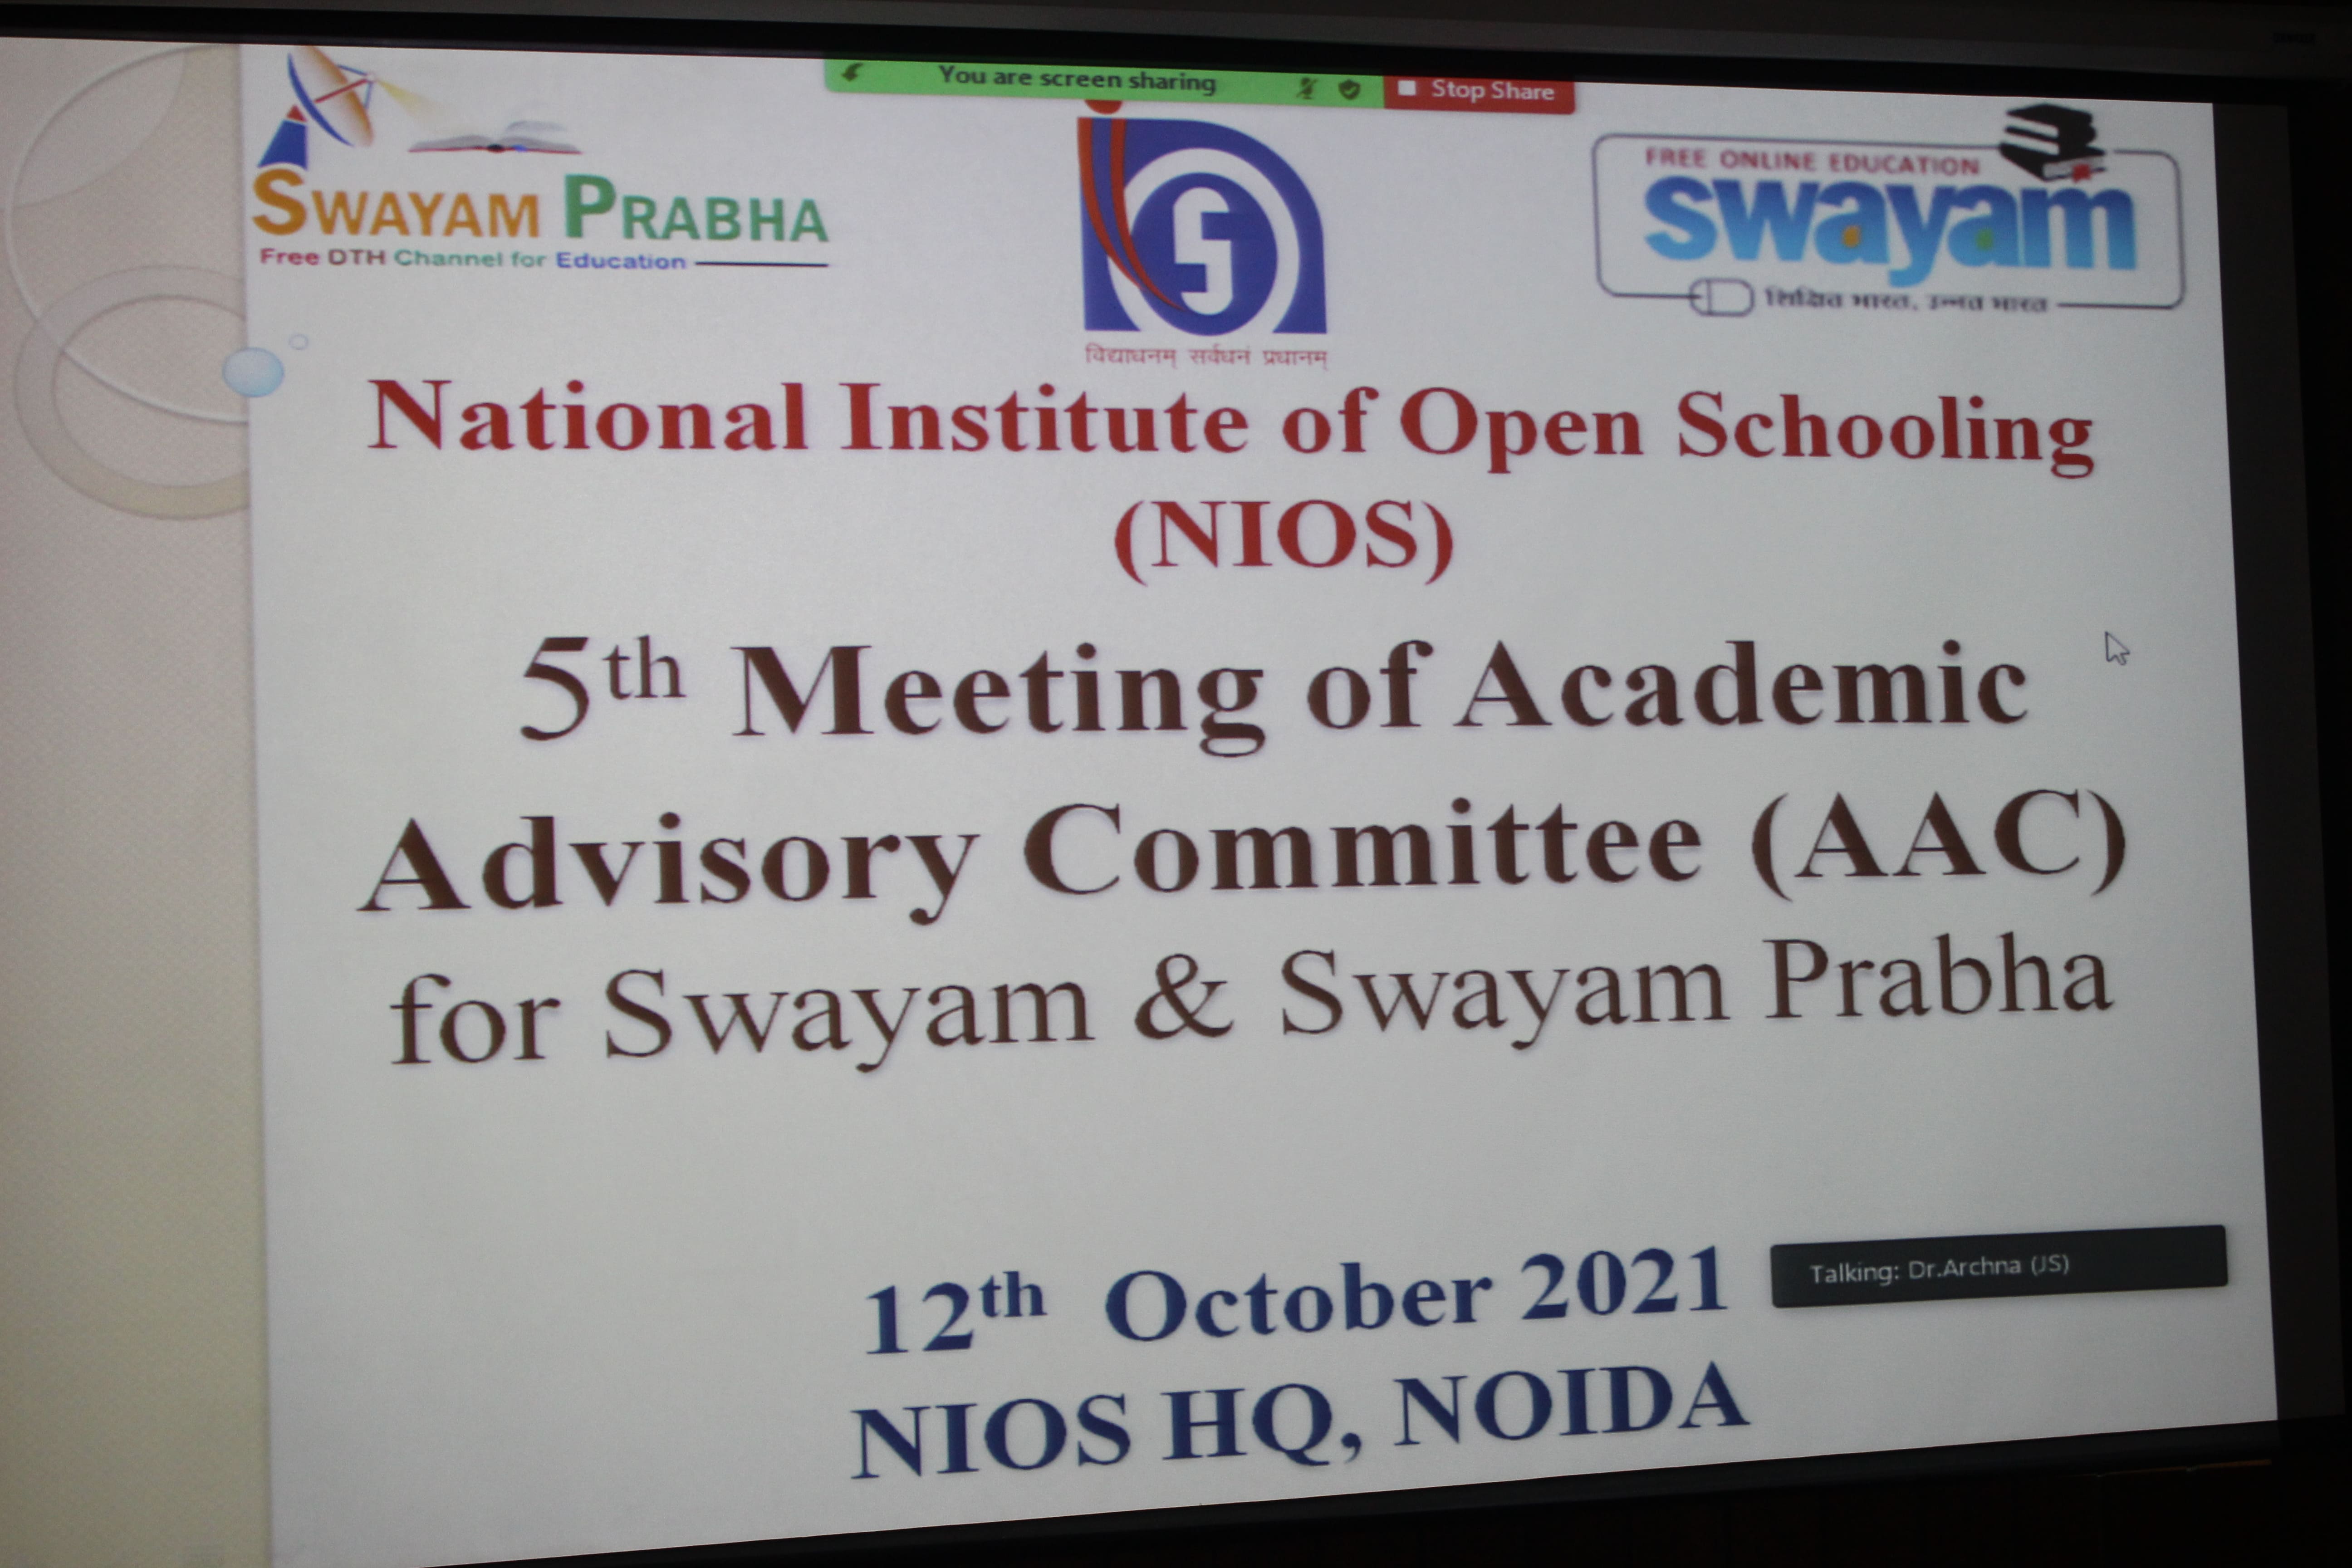 5th Meeting of Academic Advisory Committee (AAC) for Swayam & Swayam Prabha on 12th October, 2021